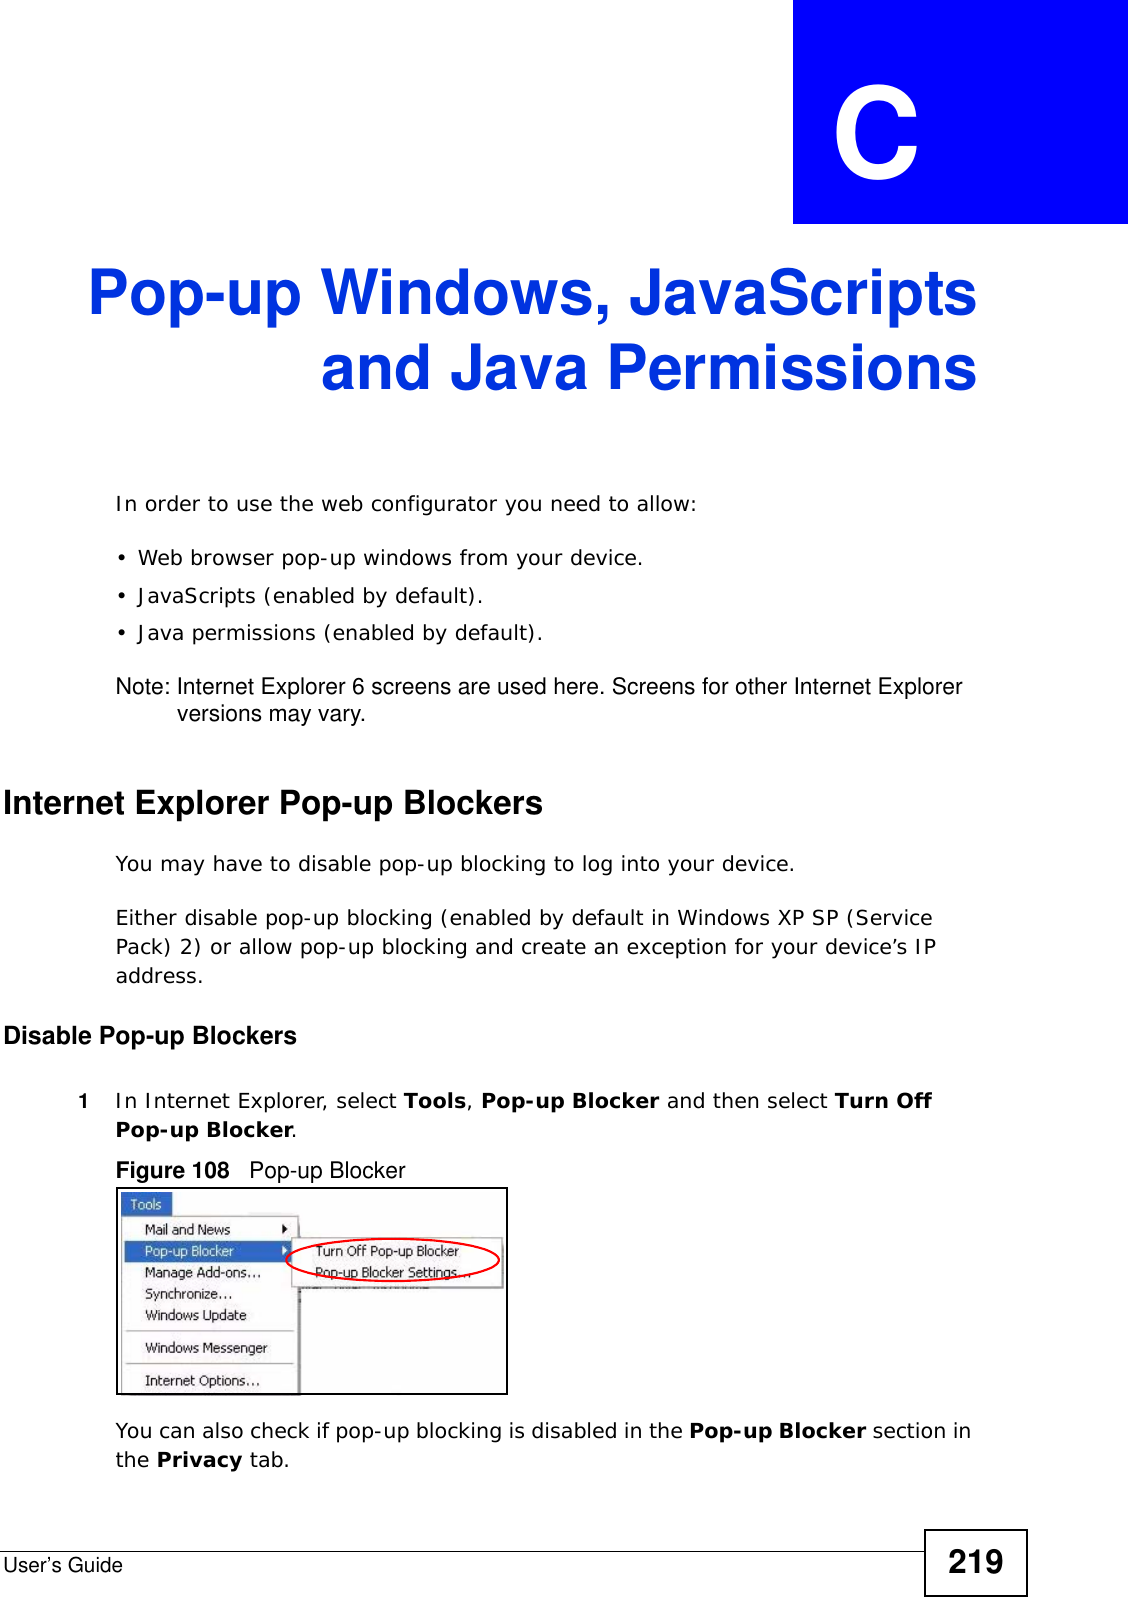 User’s Guide 219APPENDIX  C Pop-up Windows, JavaScriptsand Java PermissionsIn order to use the web configurator you need to allow:• Web browser pop-up windows from your device.• JavaScripts (enabled by default).• Java permissions (enabled by default).Note: Internet Explorer 6 screens are used here. Screens for other Internet Explorer versions may vary.Internet Explorer Pop-up BlockersYou may have to disable pop-up blocking to log into your device. Either disable pop-up blocking (enabled by default in Windows XP SP (Service Pack) 2) or allow pop-up blocking and create an exception for your device’s IP address.Disable Pop-up Blockers1In Internet Explorer, select Tools, Pop-up Blocker and then select Turn Off Pop-up Blocker. Figure 108   Pop-up BlockerYou can also check if pop-up blocking is disabled in the Pop-up Blocker section in the Privacy tab. 